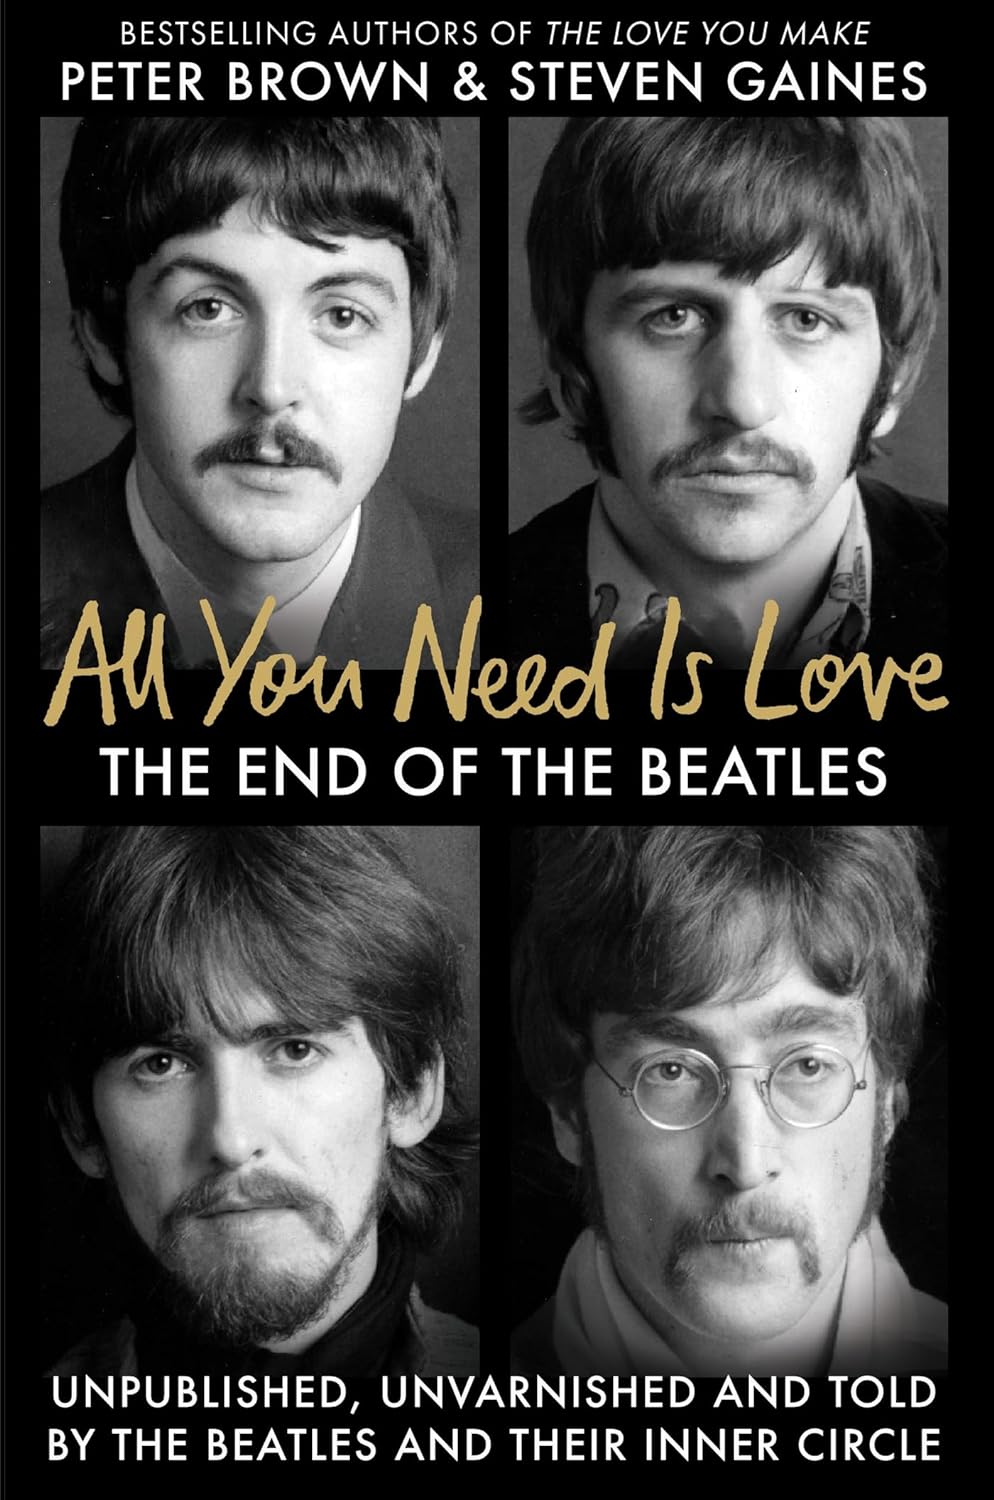 Peter Brown & Steven Gaines - All You Need Is Love- The Beatles in Their Own Words Unpublished, Unvarnished, and Told by The Be